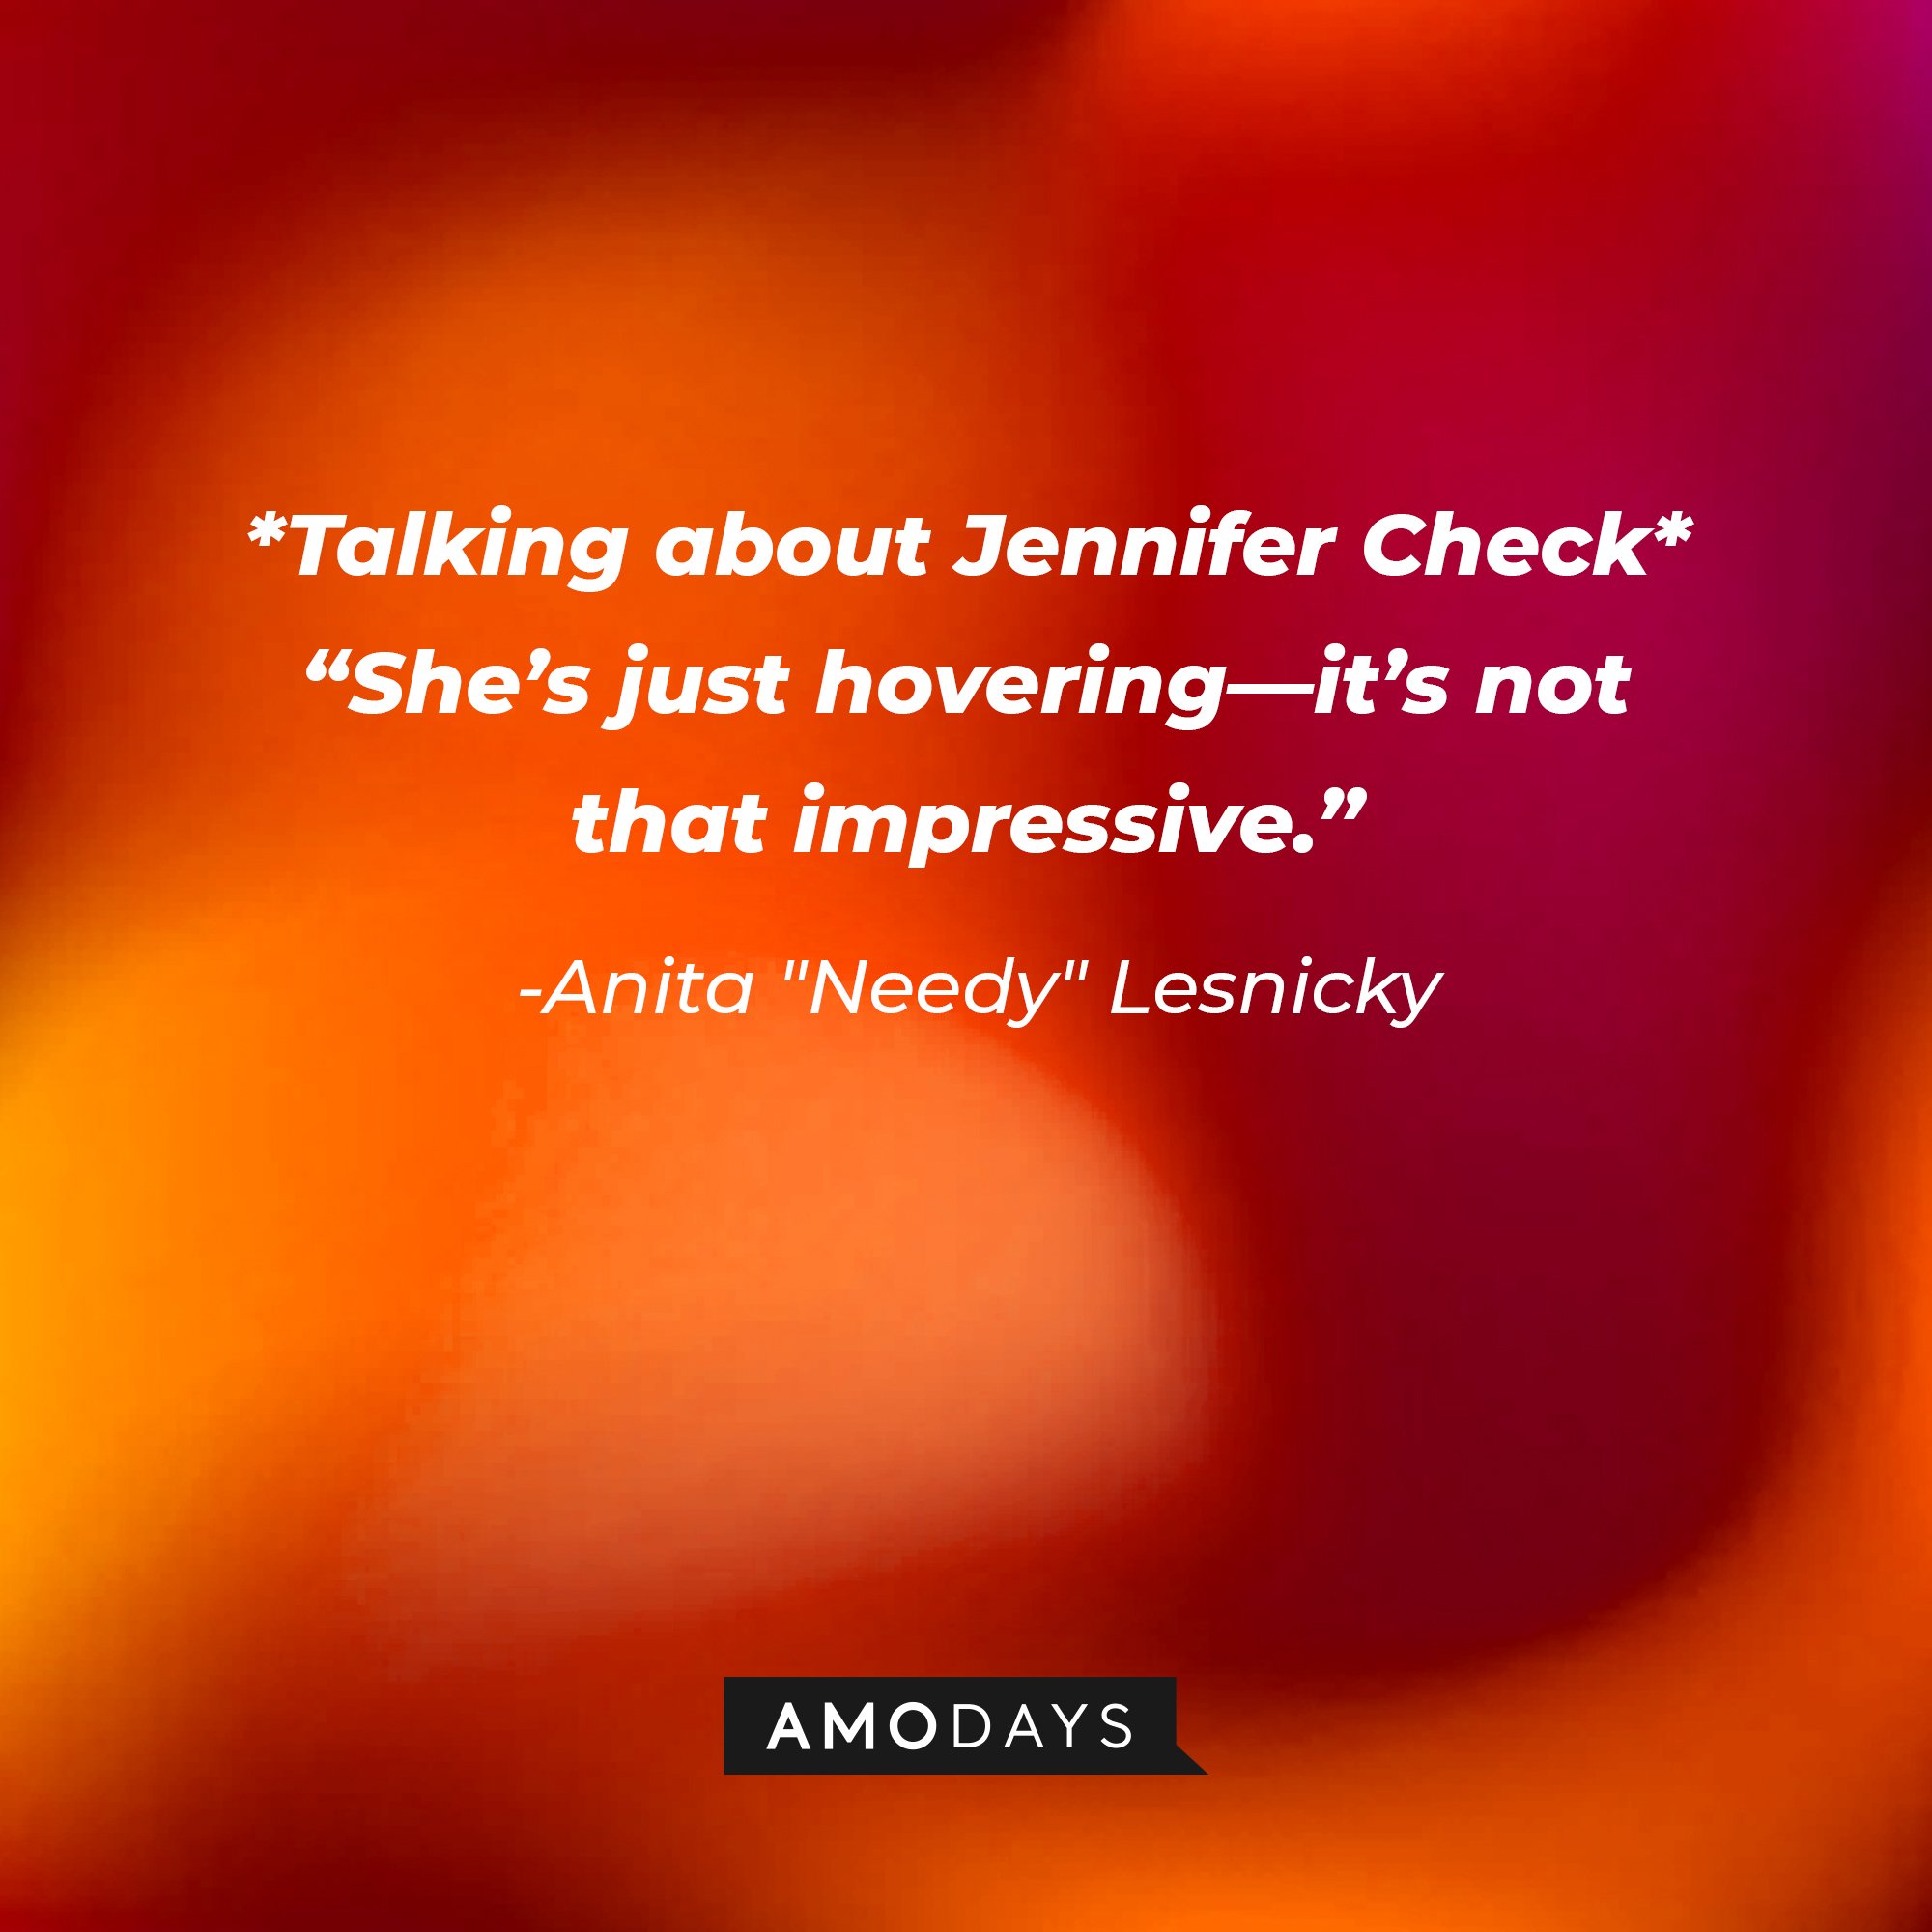 Anita "Needy" Lesnicky’s quote: [*Talking about Jennifer Check* ]“She’s just hovering—it’s not that impressive.” | Image: AmoDays